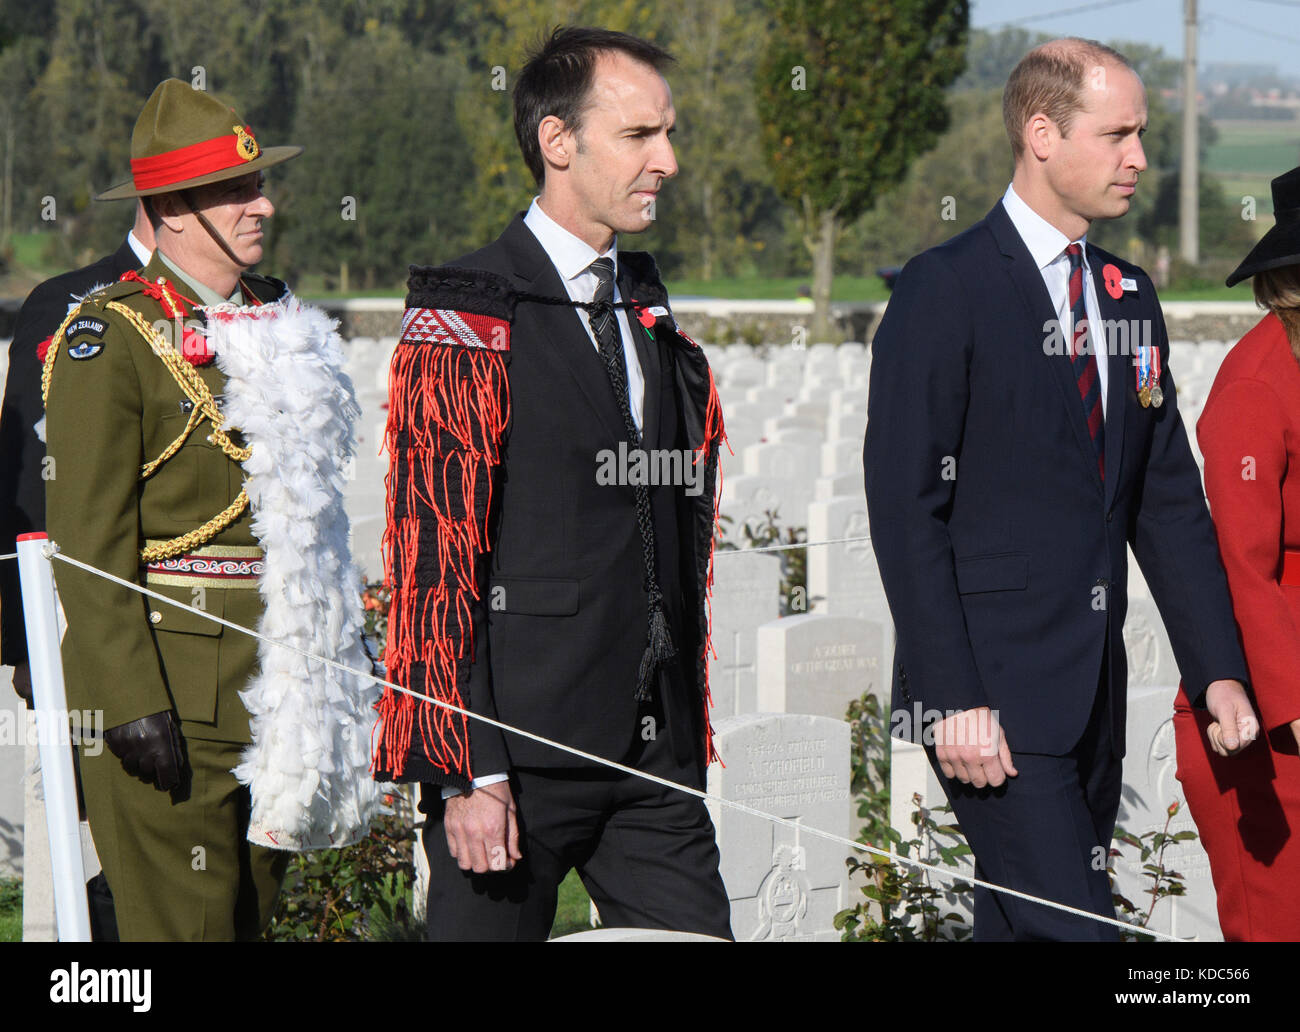 The Duke of Cambridge and New Zealand Ambassador to Belgium Greg Andrews attend the New Zealand national commemoration for the Battle of Passchendaele at Tyne Cot Cemetery, Belgium. Stock Photo